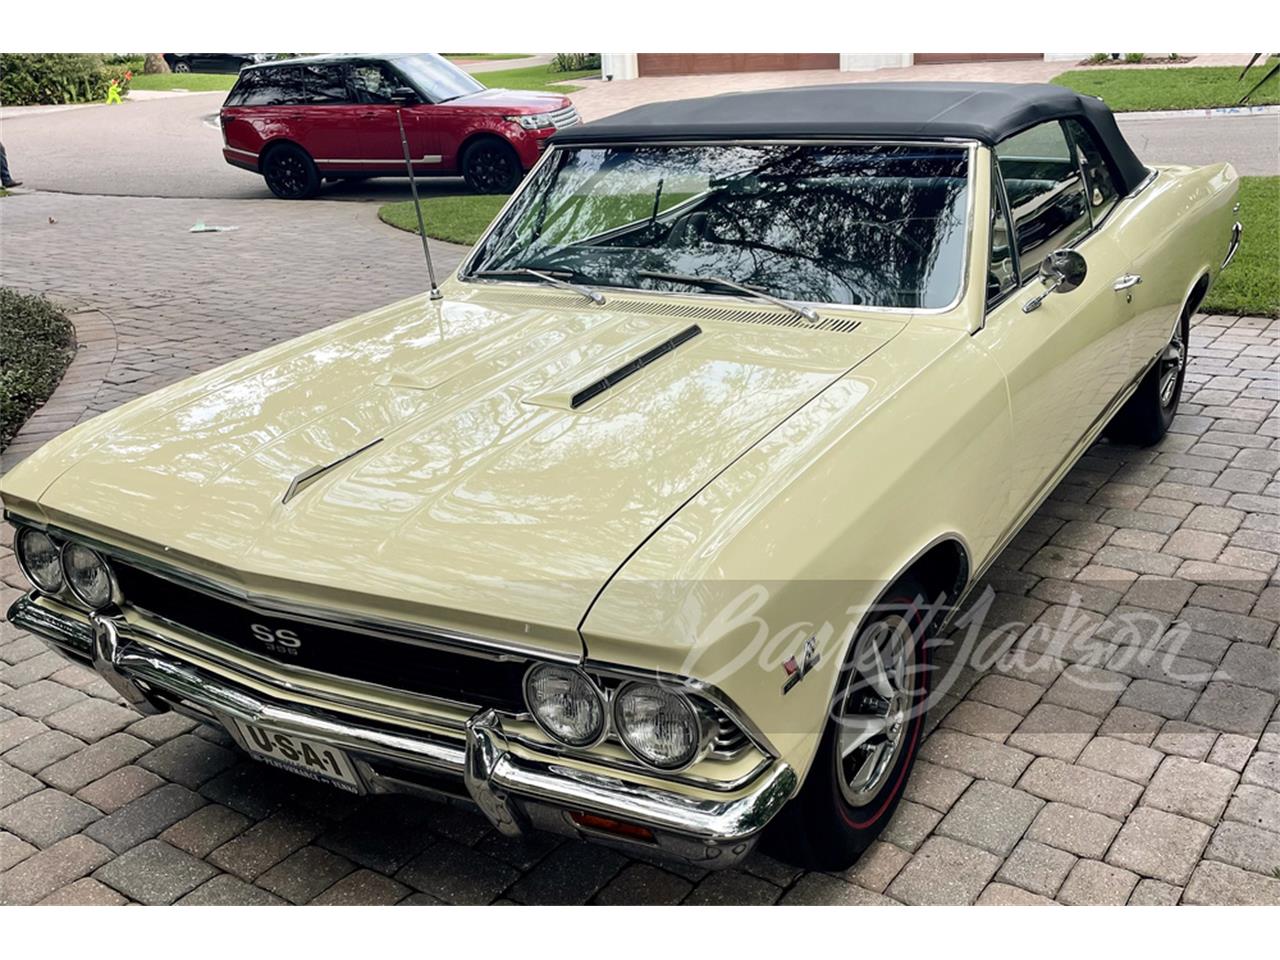 For Sale at Auction: 1966 Chevrolet Chevelle SS in Scottsdale, Arizona for sale in Scottsdale, AZ